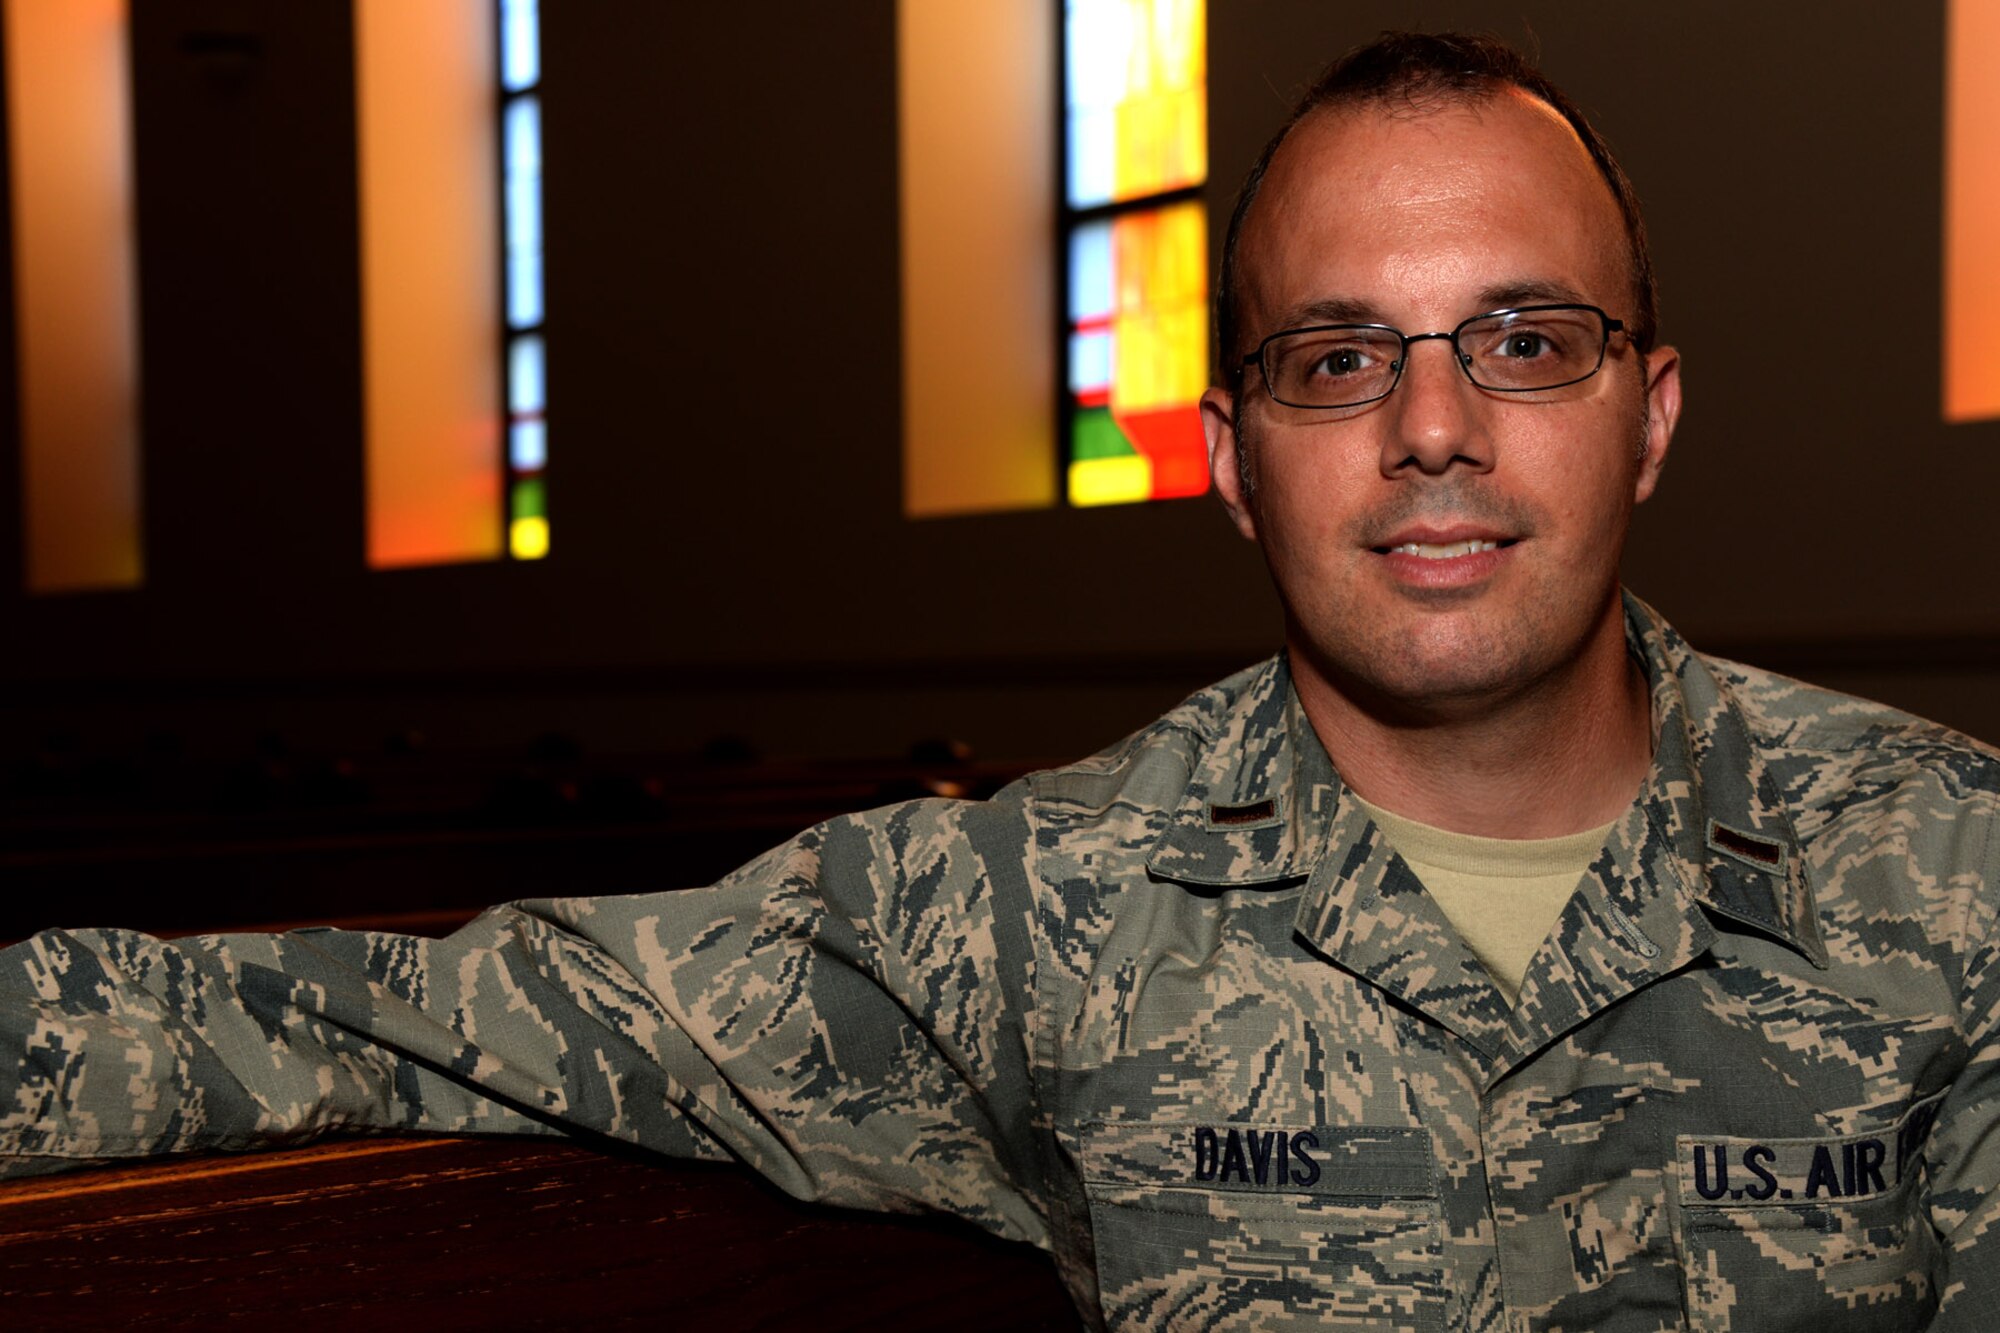 2nd Lt. Steven Davis poses for a photo at the base chapel on Joint Base Andrews, Md. June 7, 2016. Davis is a candidate in the Chaplain Candidate Intensive Internship program. Davis spent time shadowing and experiencing the strategic and organization level of the Air Force Chaplain Corps to help give him an overall perspective of our functional community. (U.S. Air Force photo/Tech. Sgt. Matt Davis)